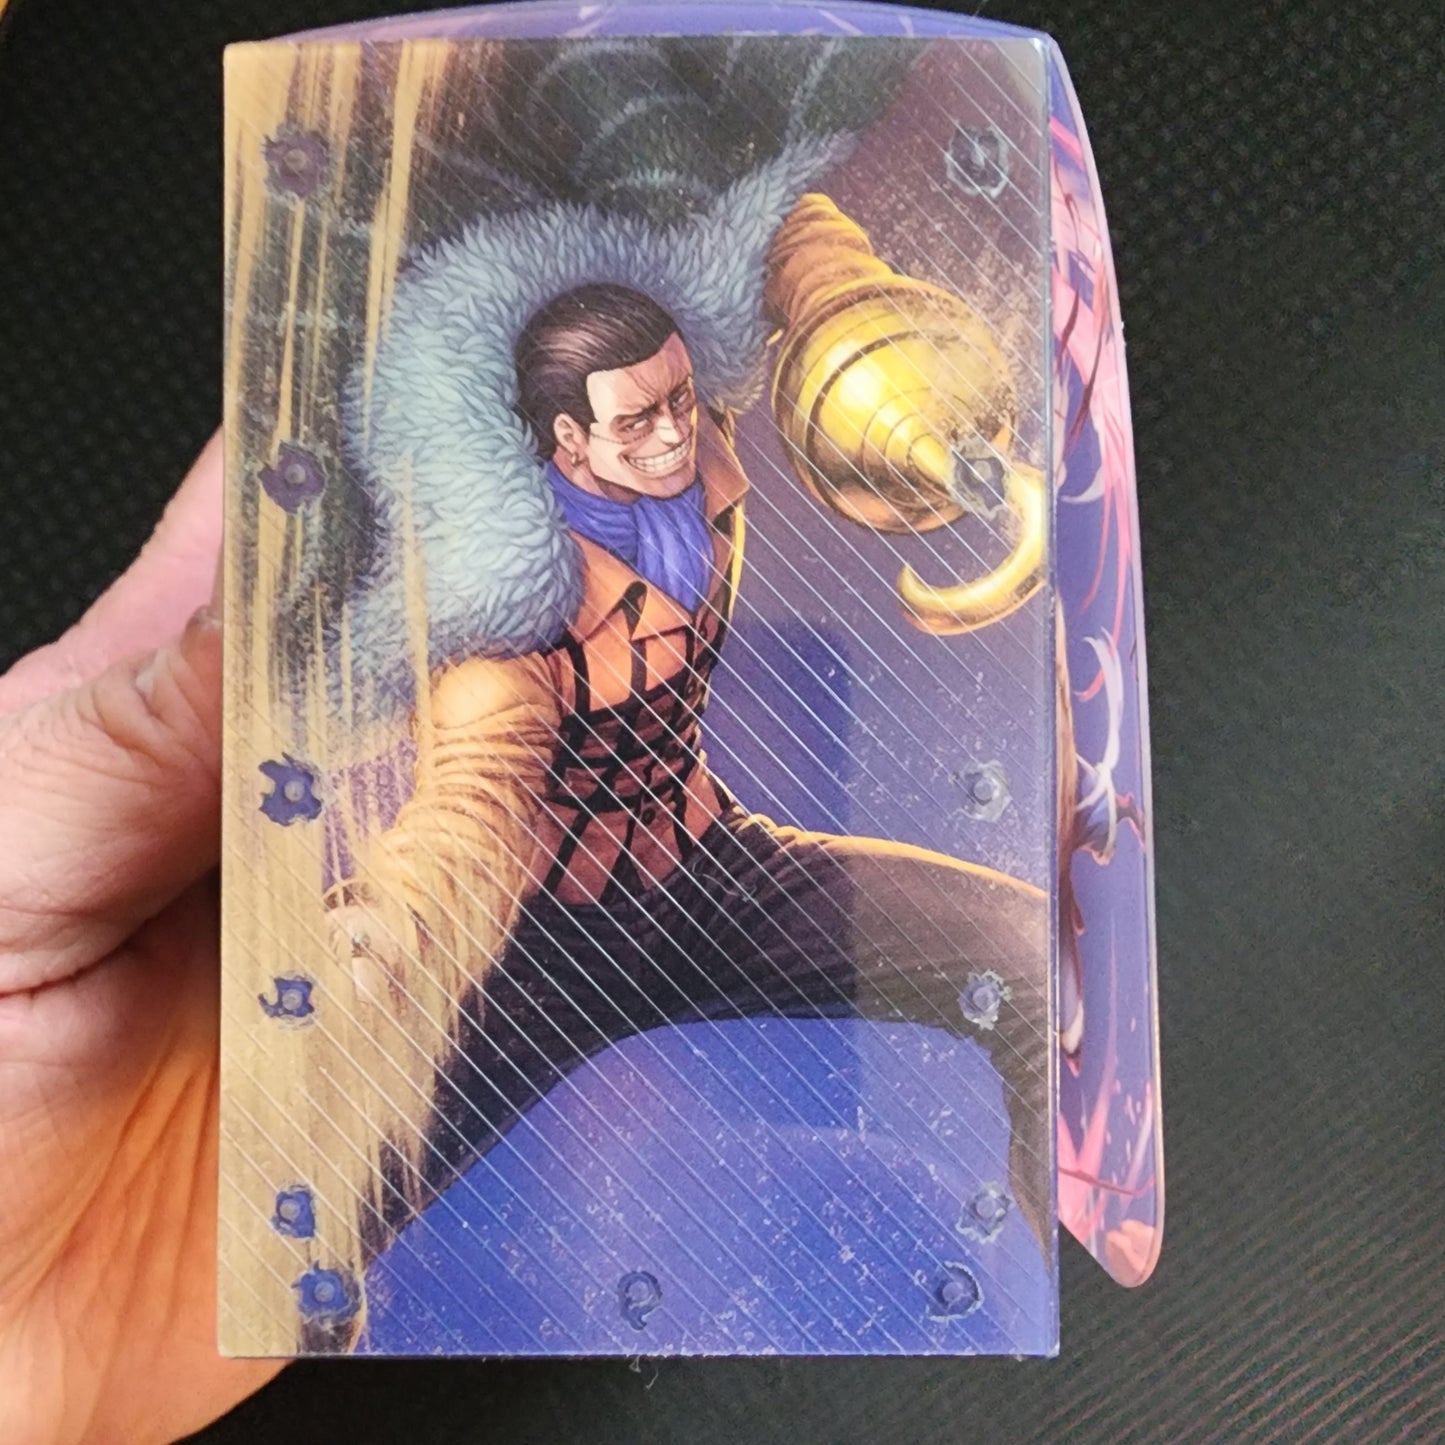 One Piece TCG: Official Deck Box